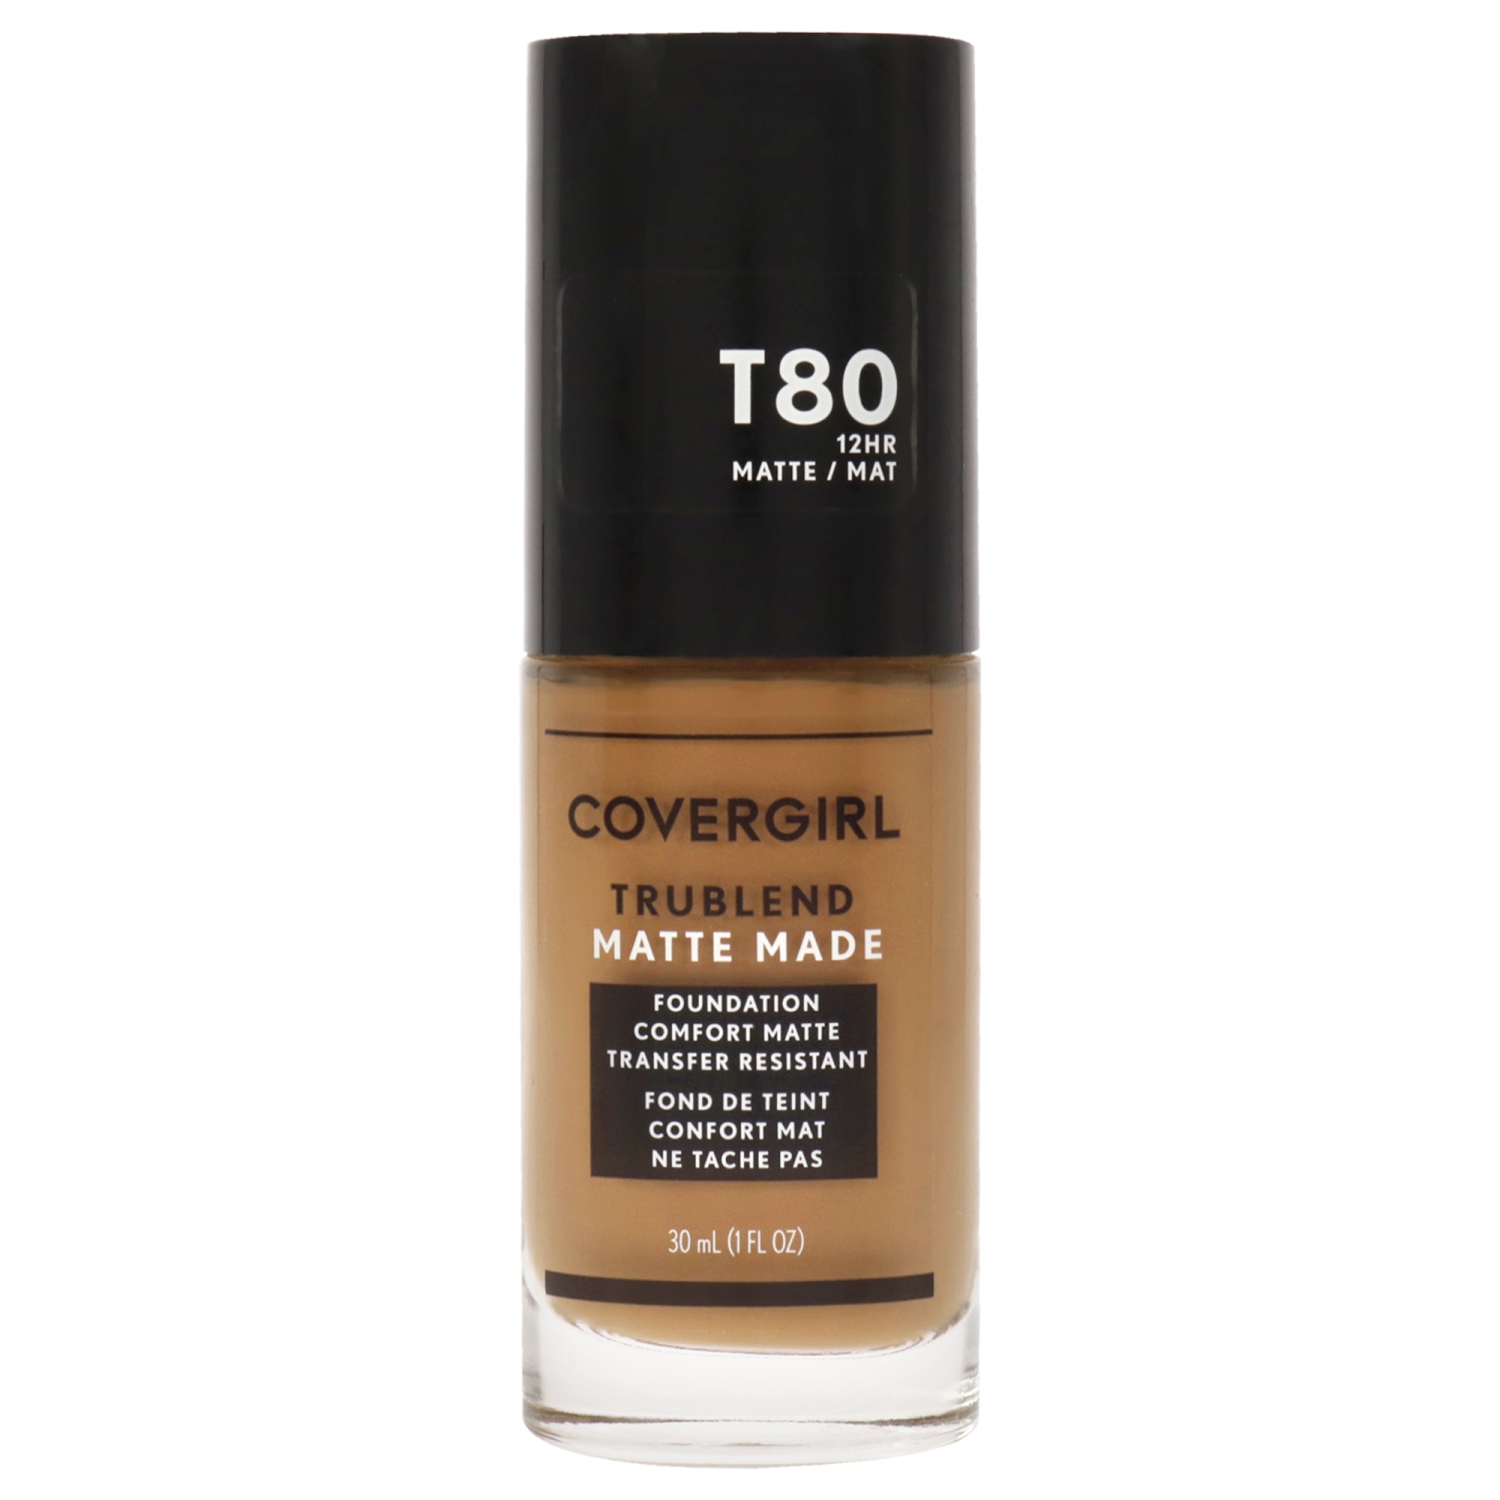 TruBlend Matte Made Liquid Foundation - T80 Toasted Caramel by CoverGirl for Women - 1 oz Foundation